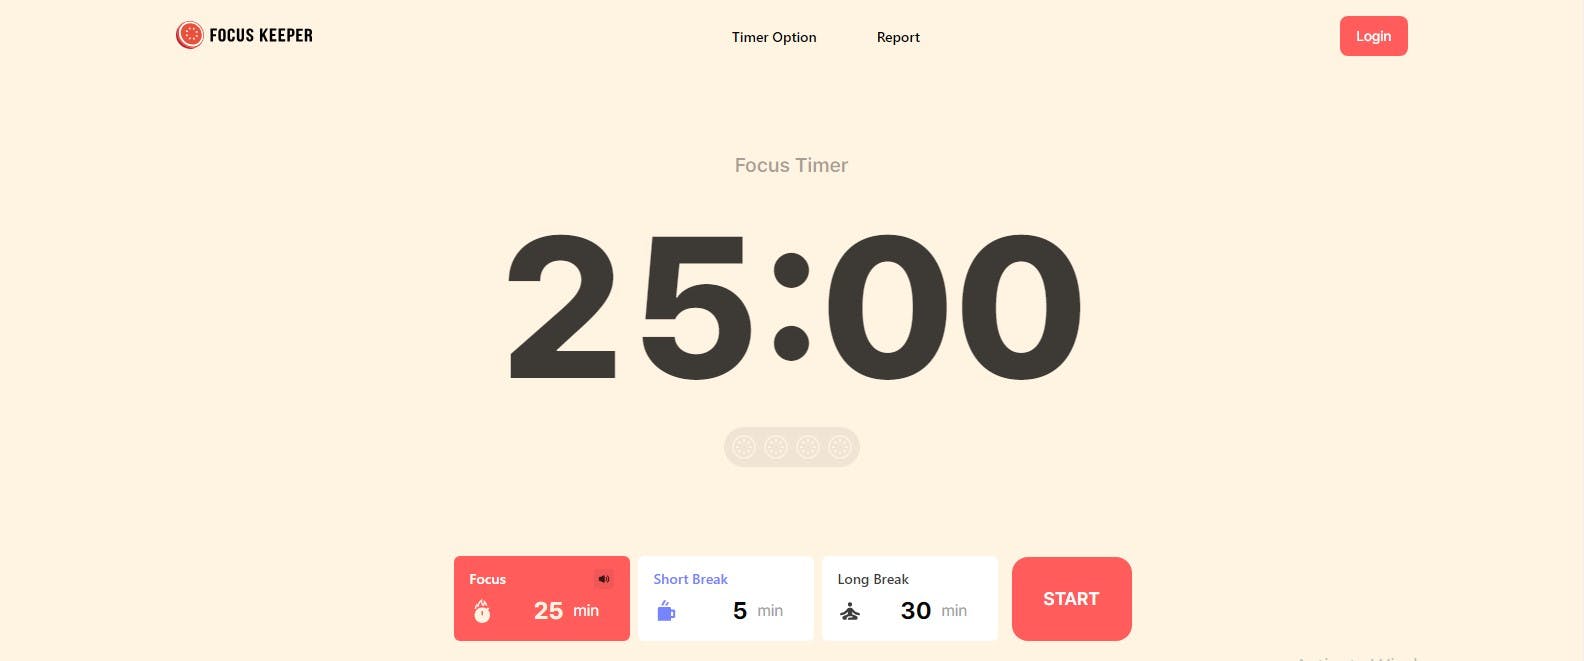 Focus Keeper - Boost focus and efficiency with intuitive Pomodoro timer and task management features.